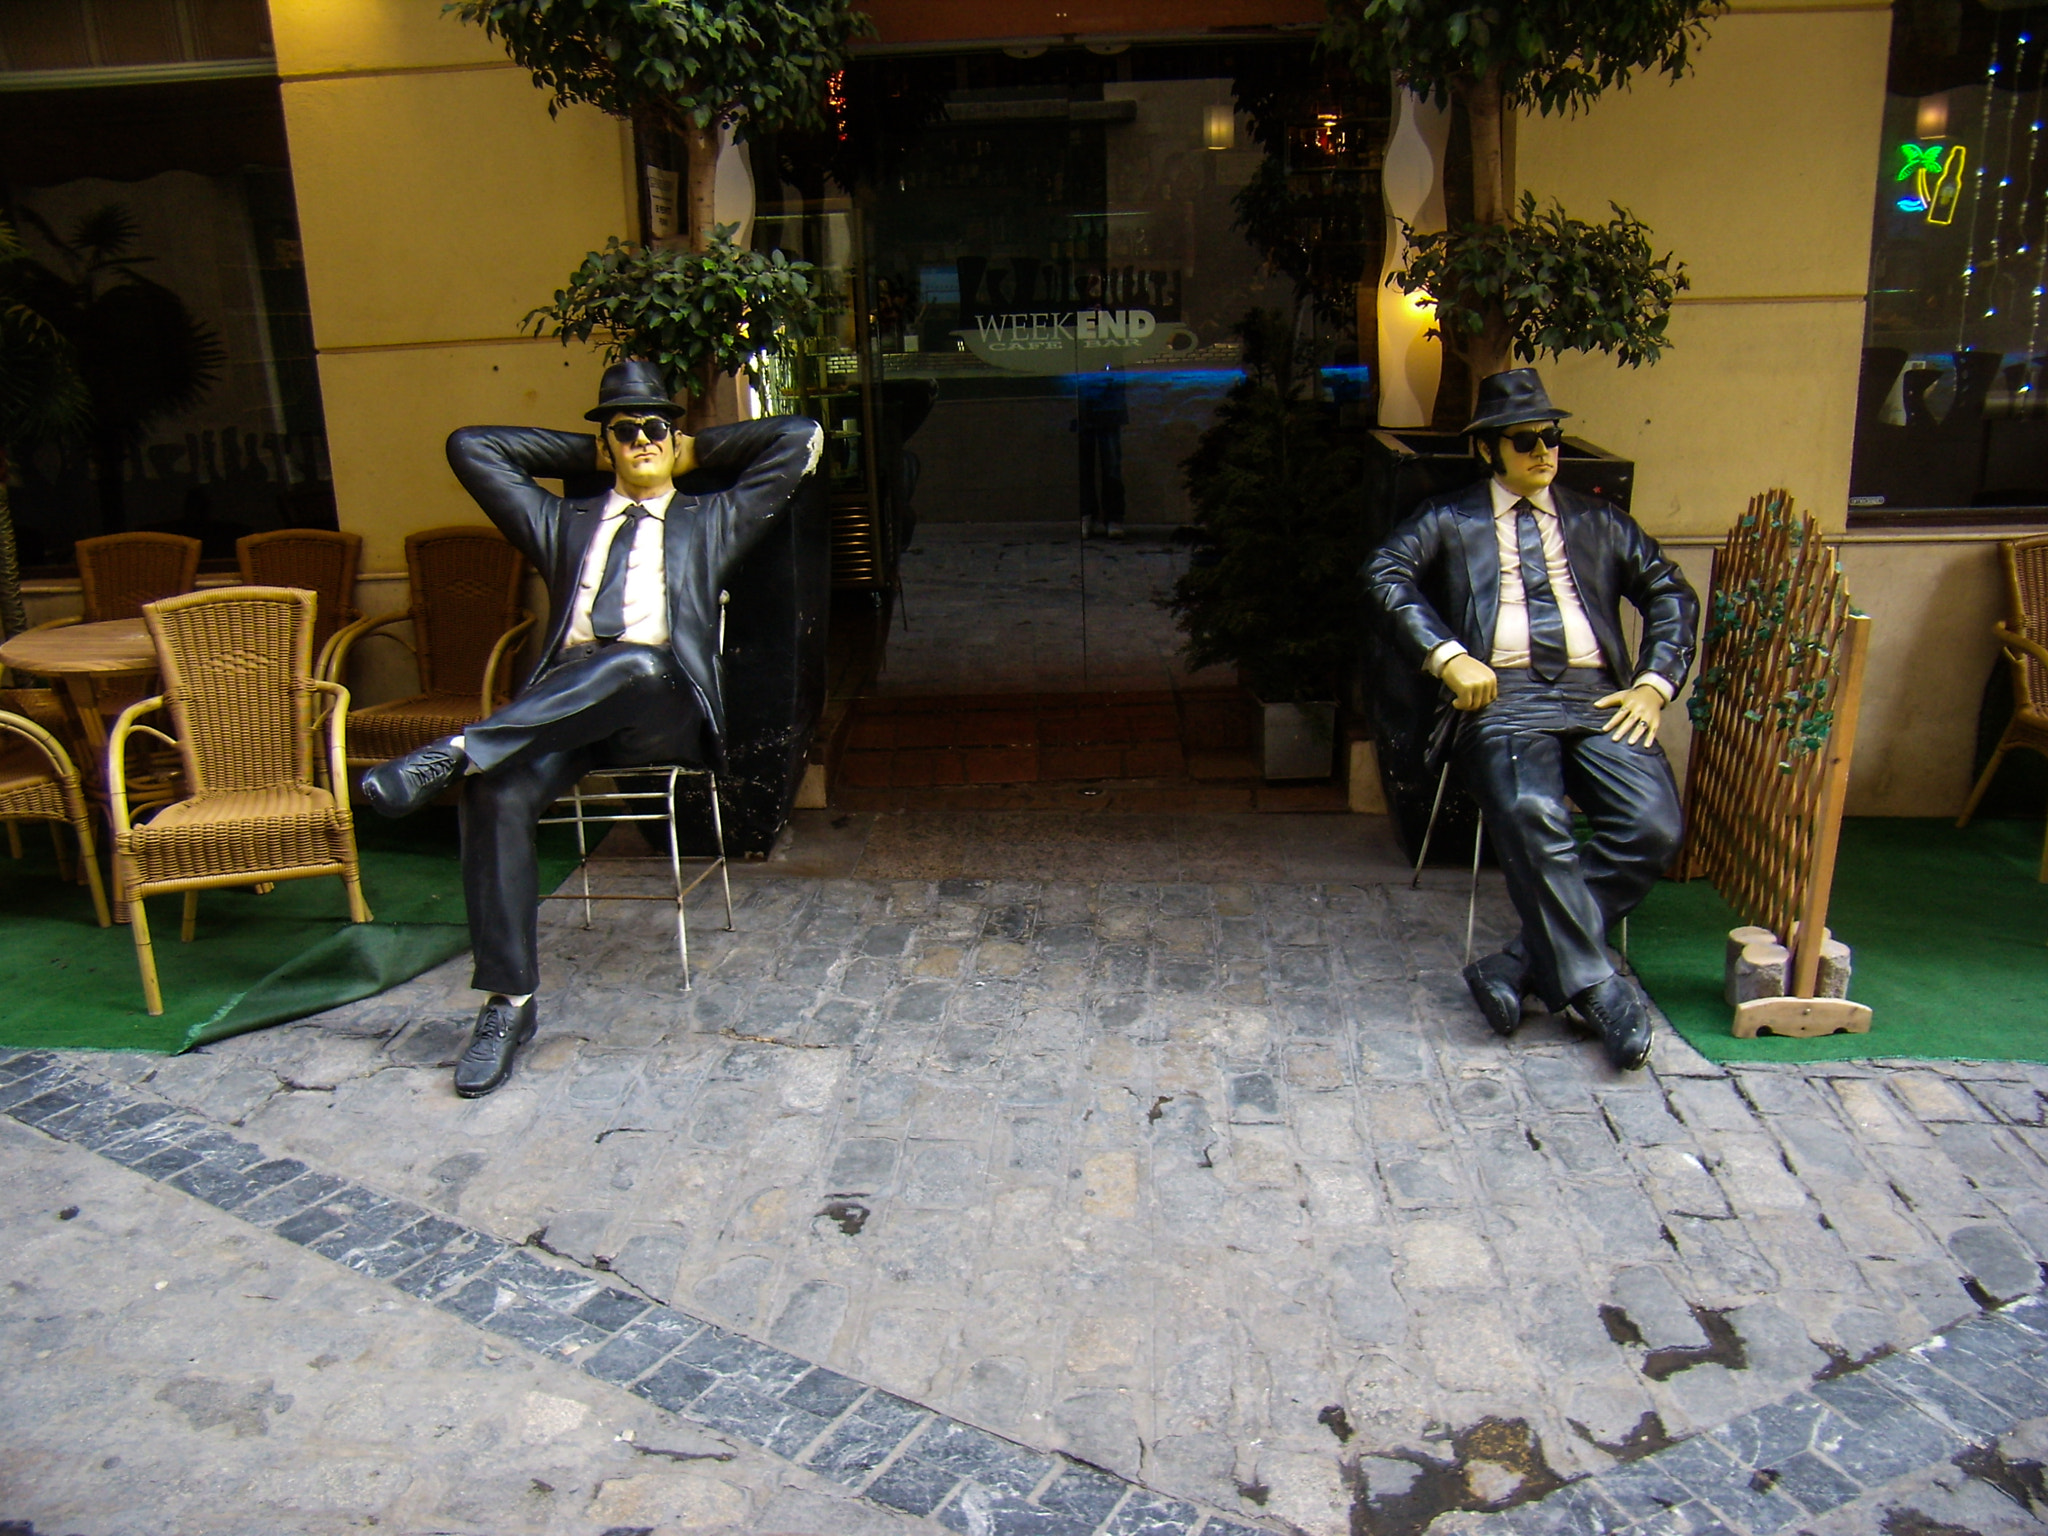 Olympus FE200 sample photo. Malaga: the blues brothers in front of a café photography